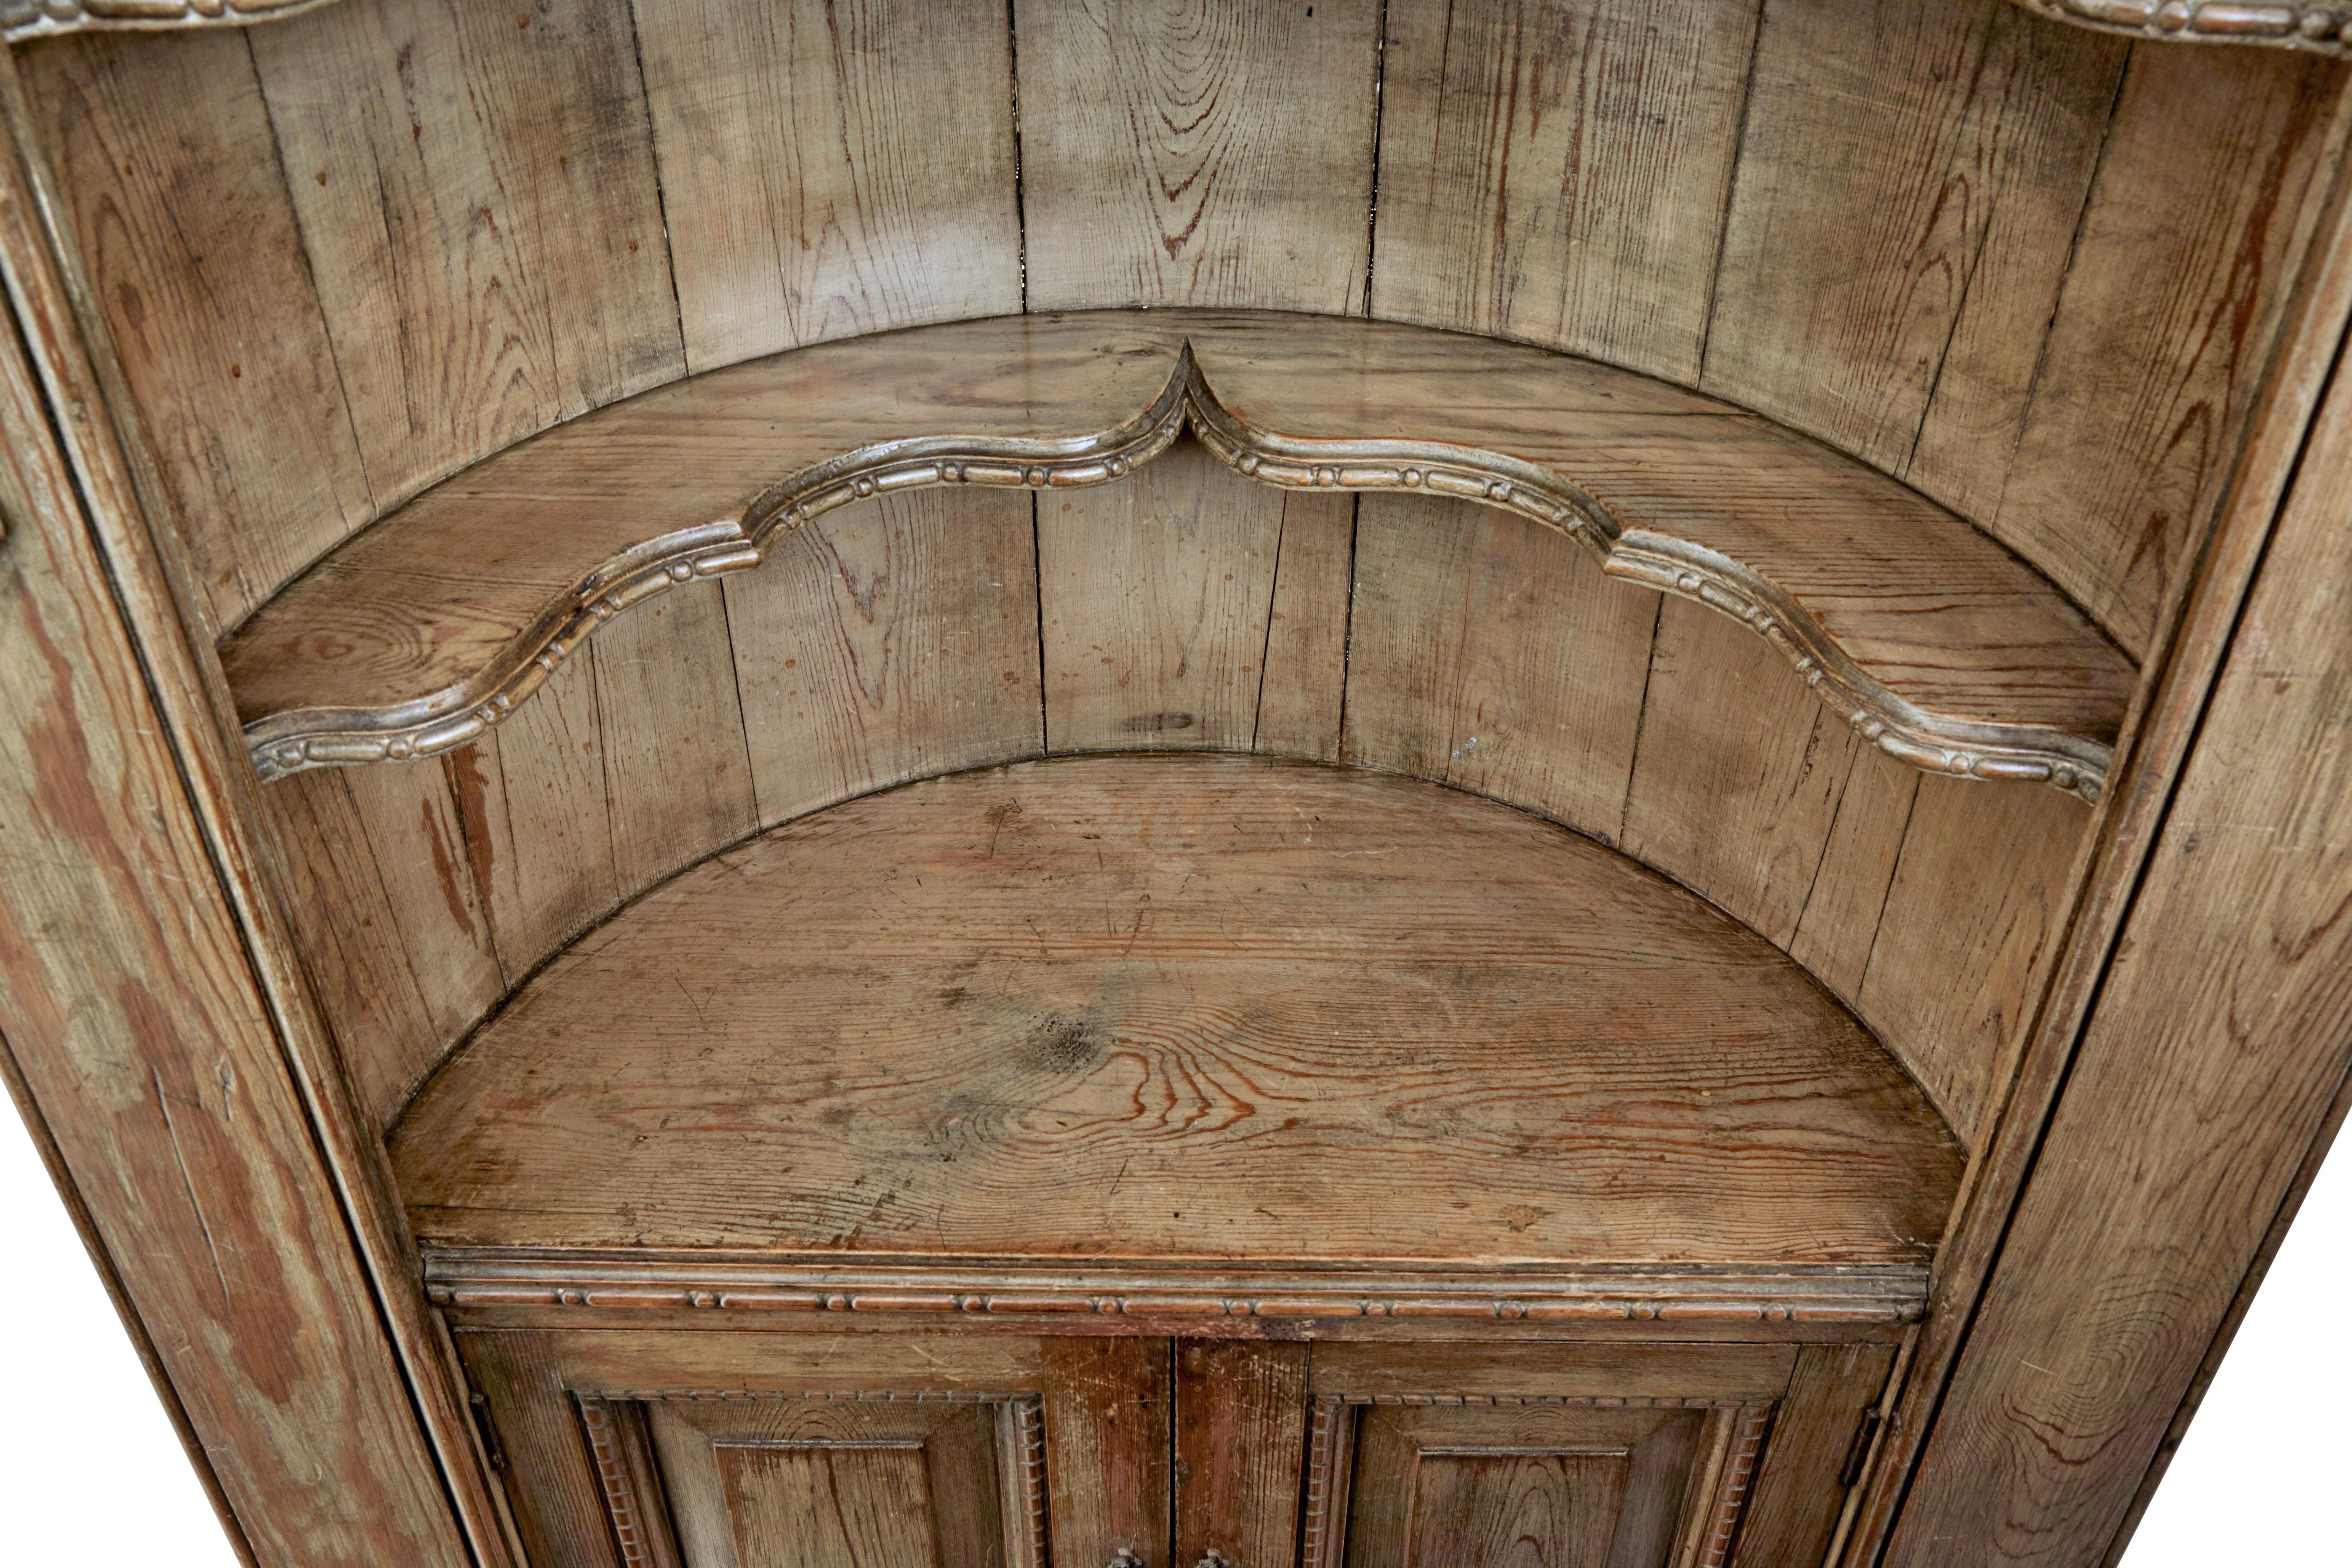 Hand-Carved Mid-18th Century Carved Pine Dome Top Fitted Cabinet